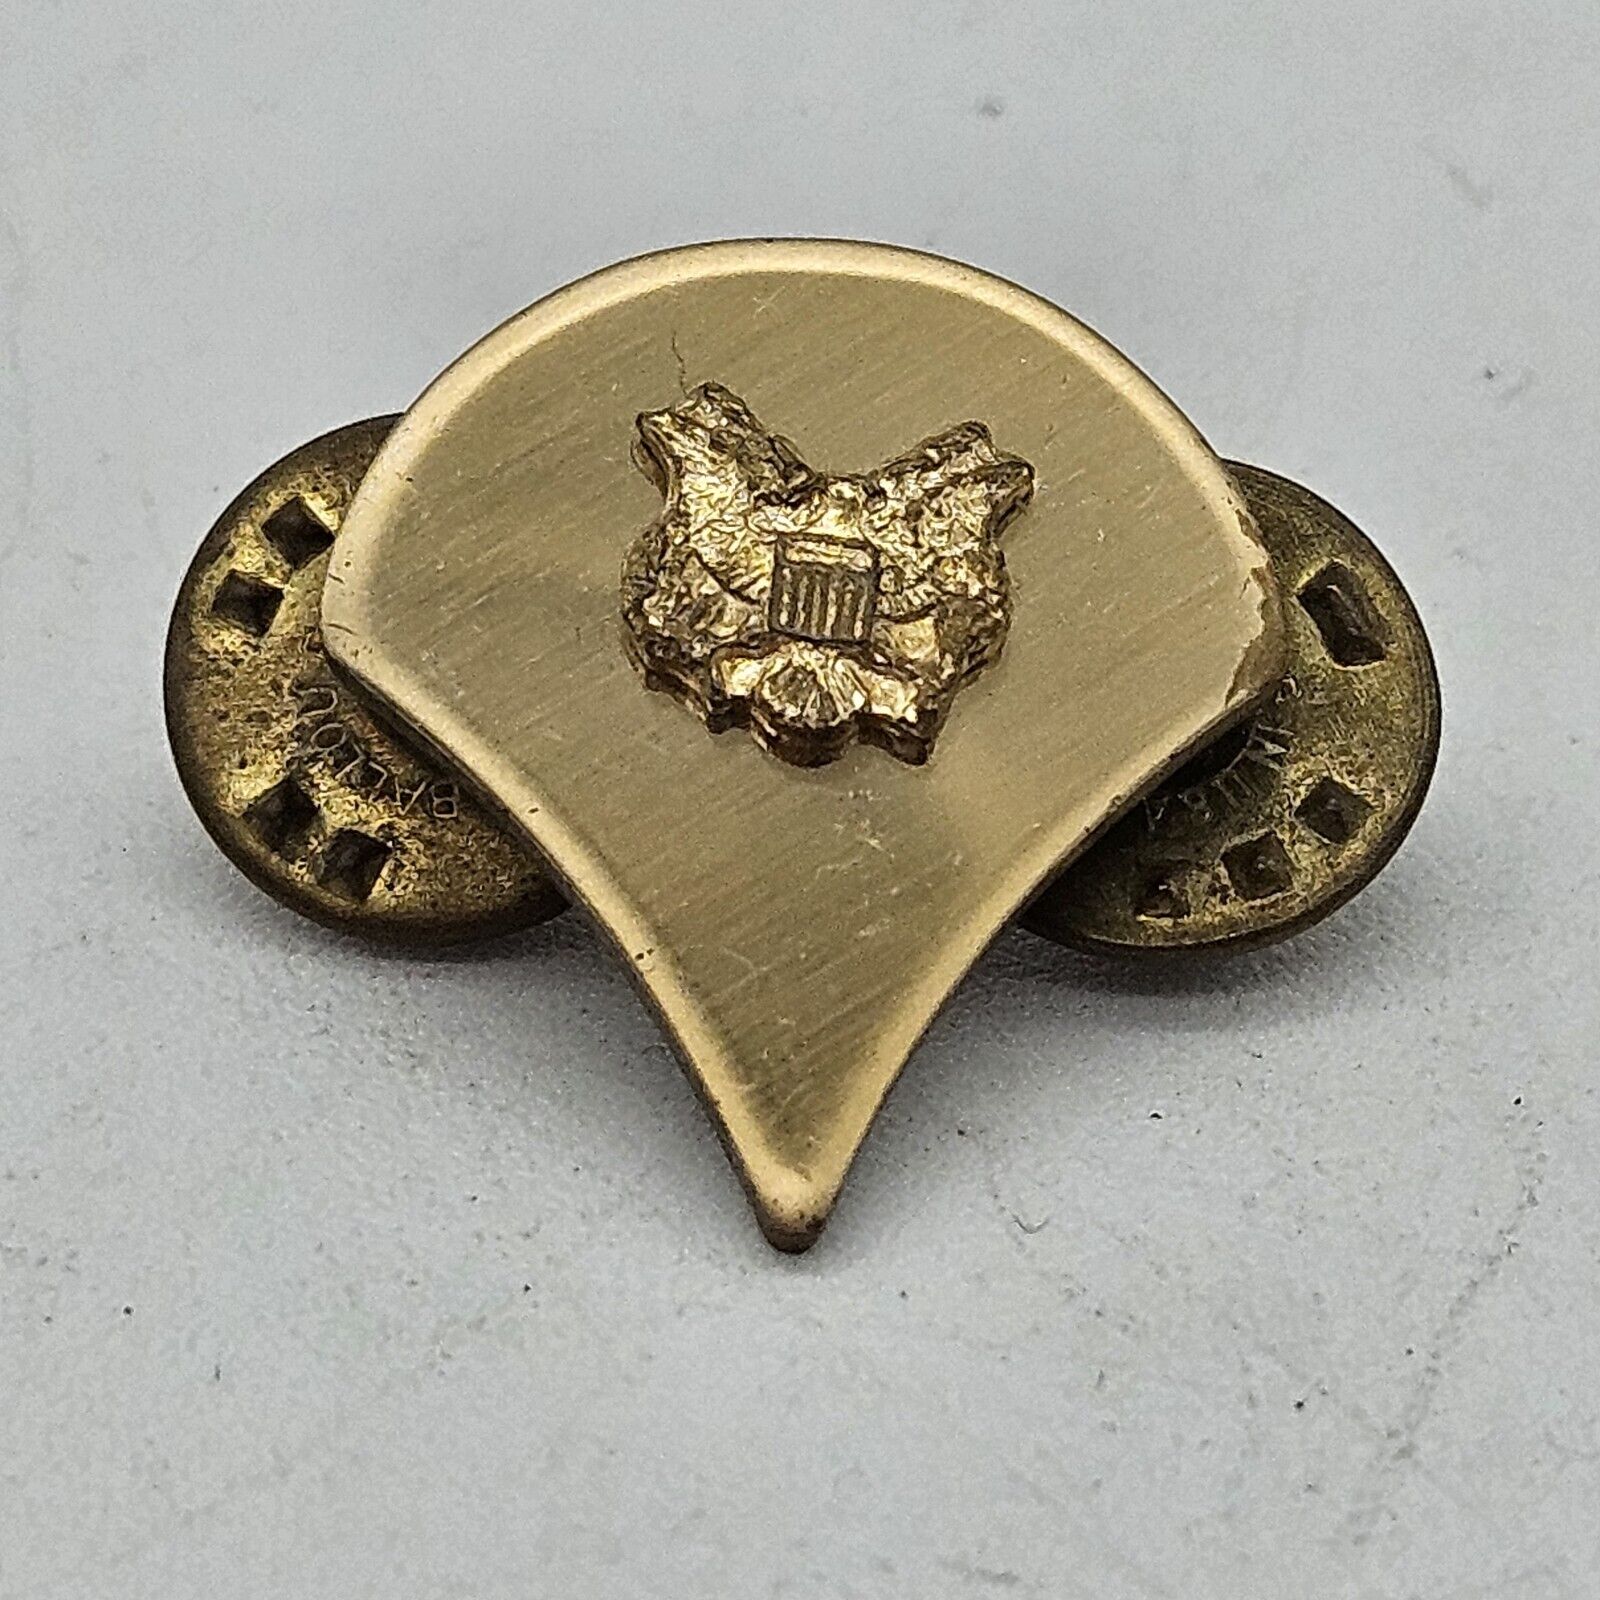 Vintage Military Army Insignia Gold Tone Eagle Lapel Pin WWII